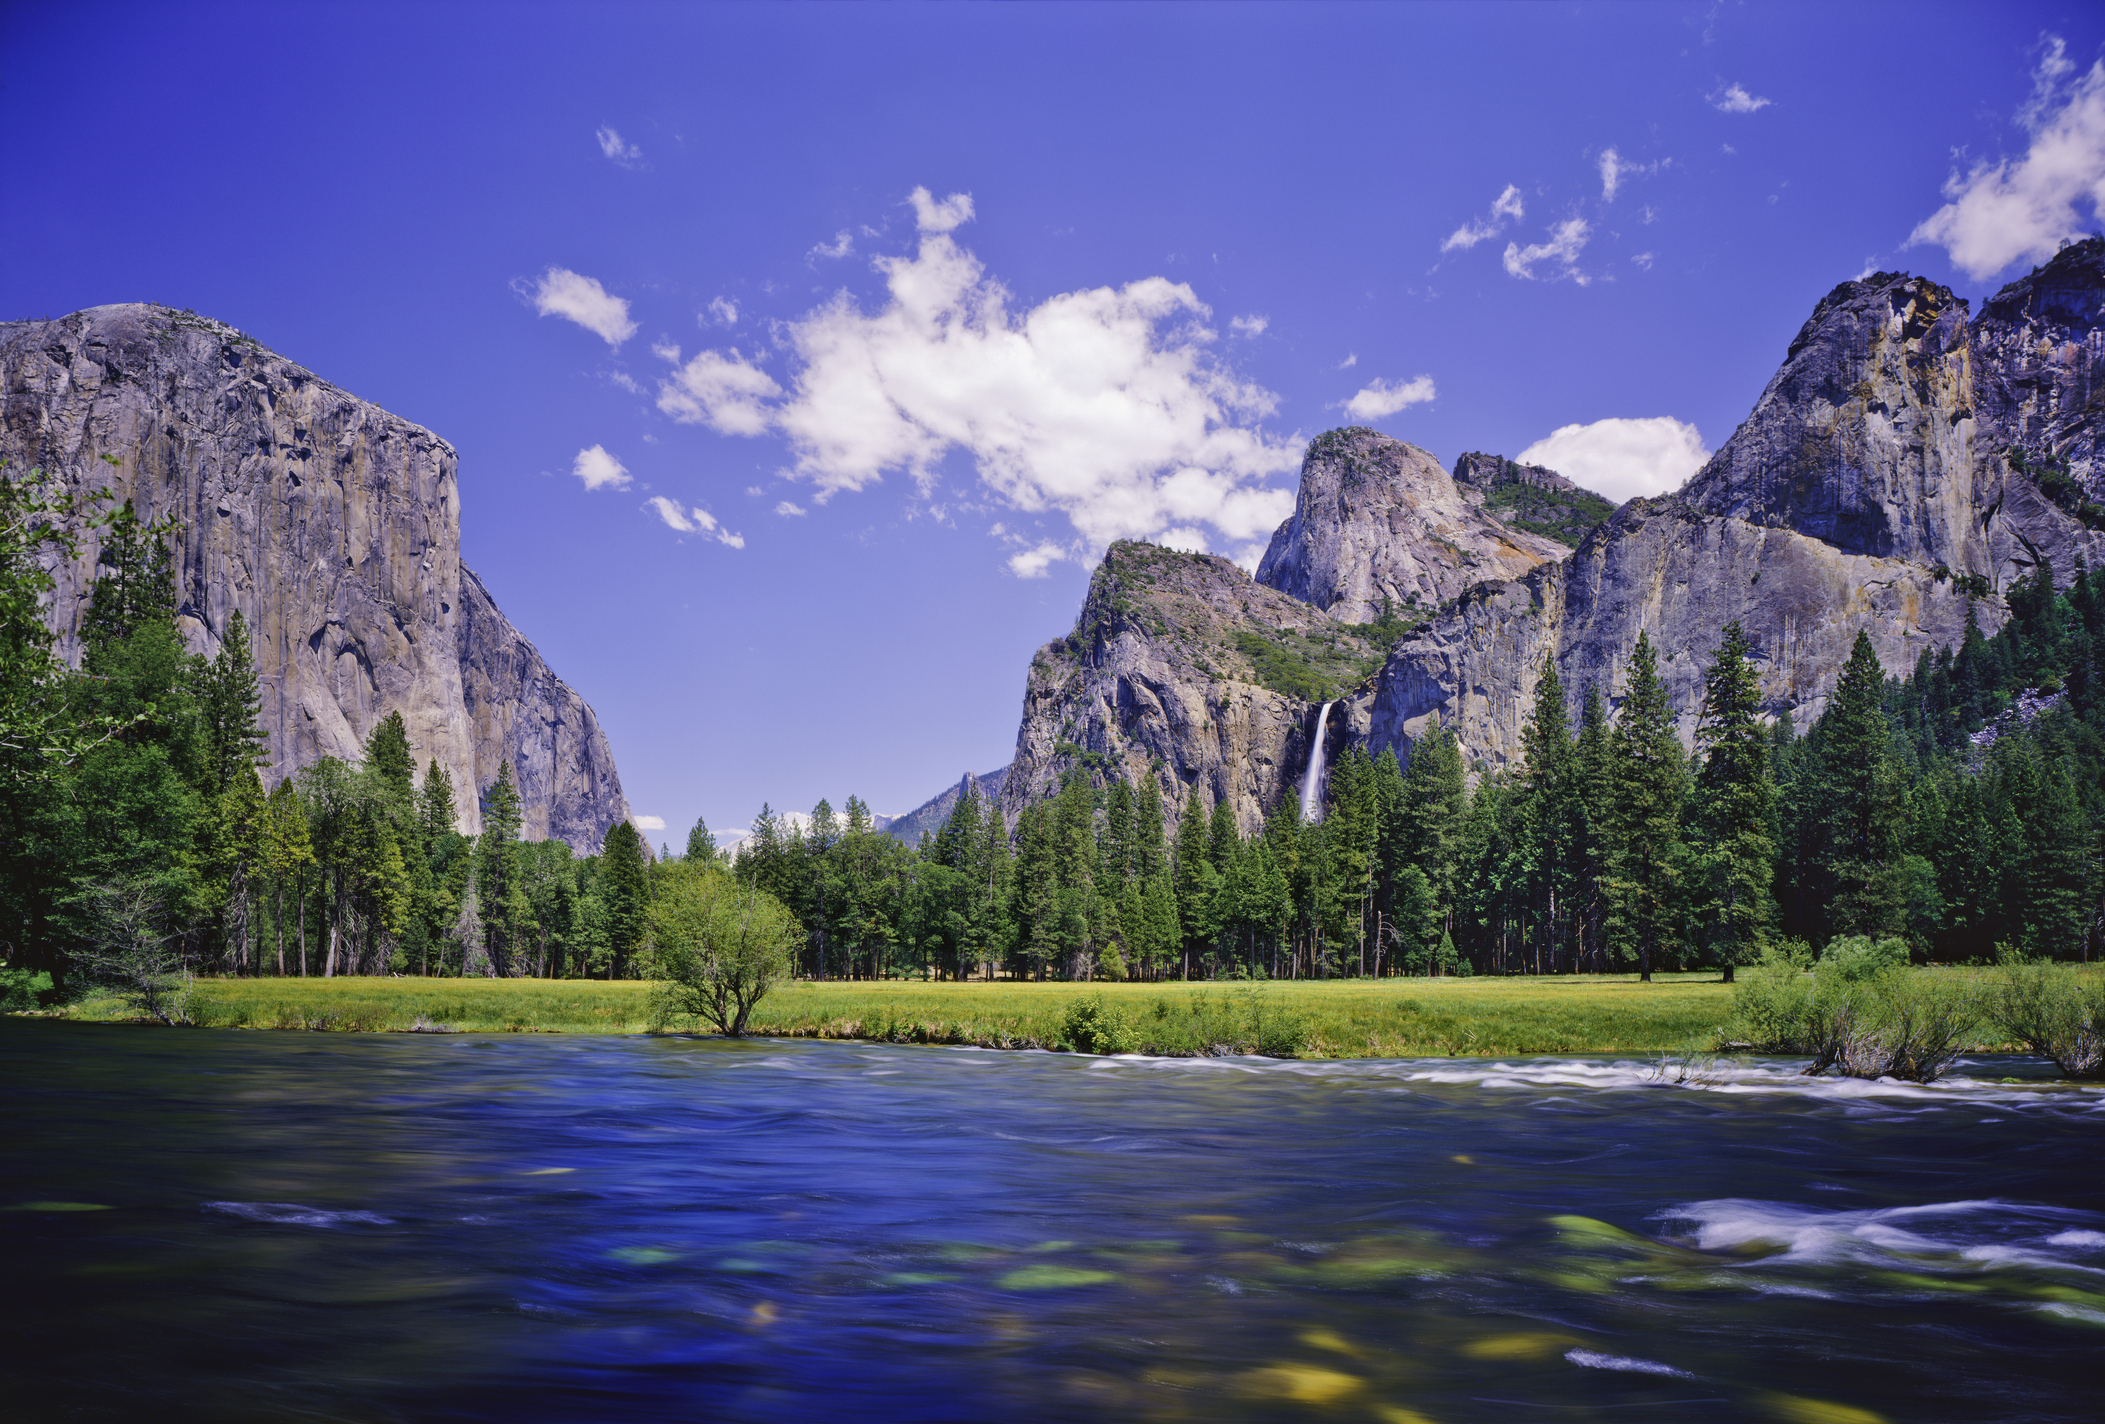 Merced River in Yosemite Valley during summer.